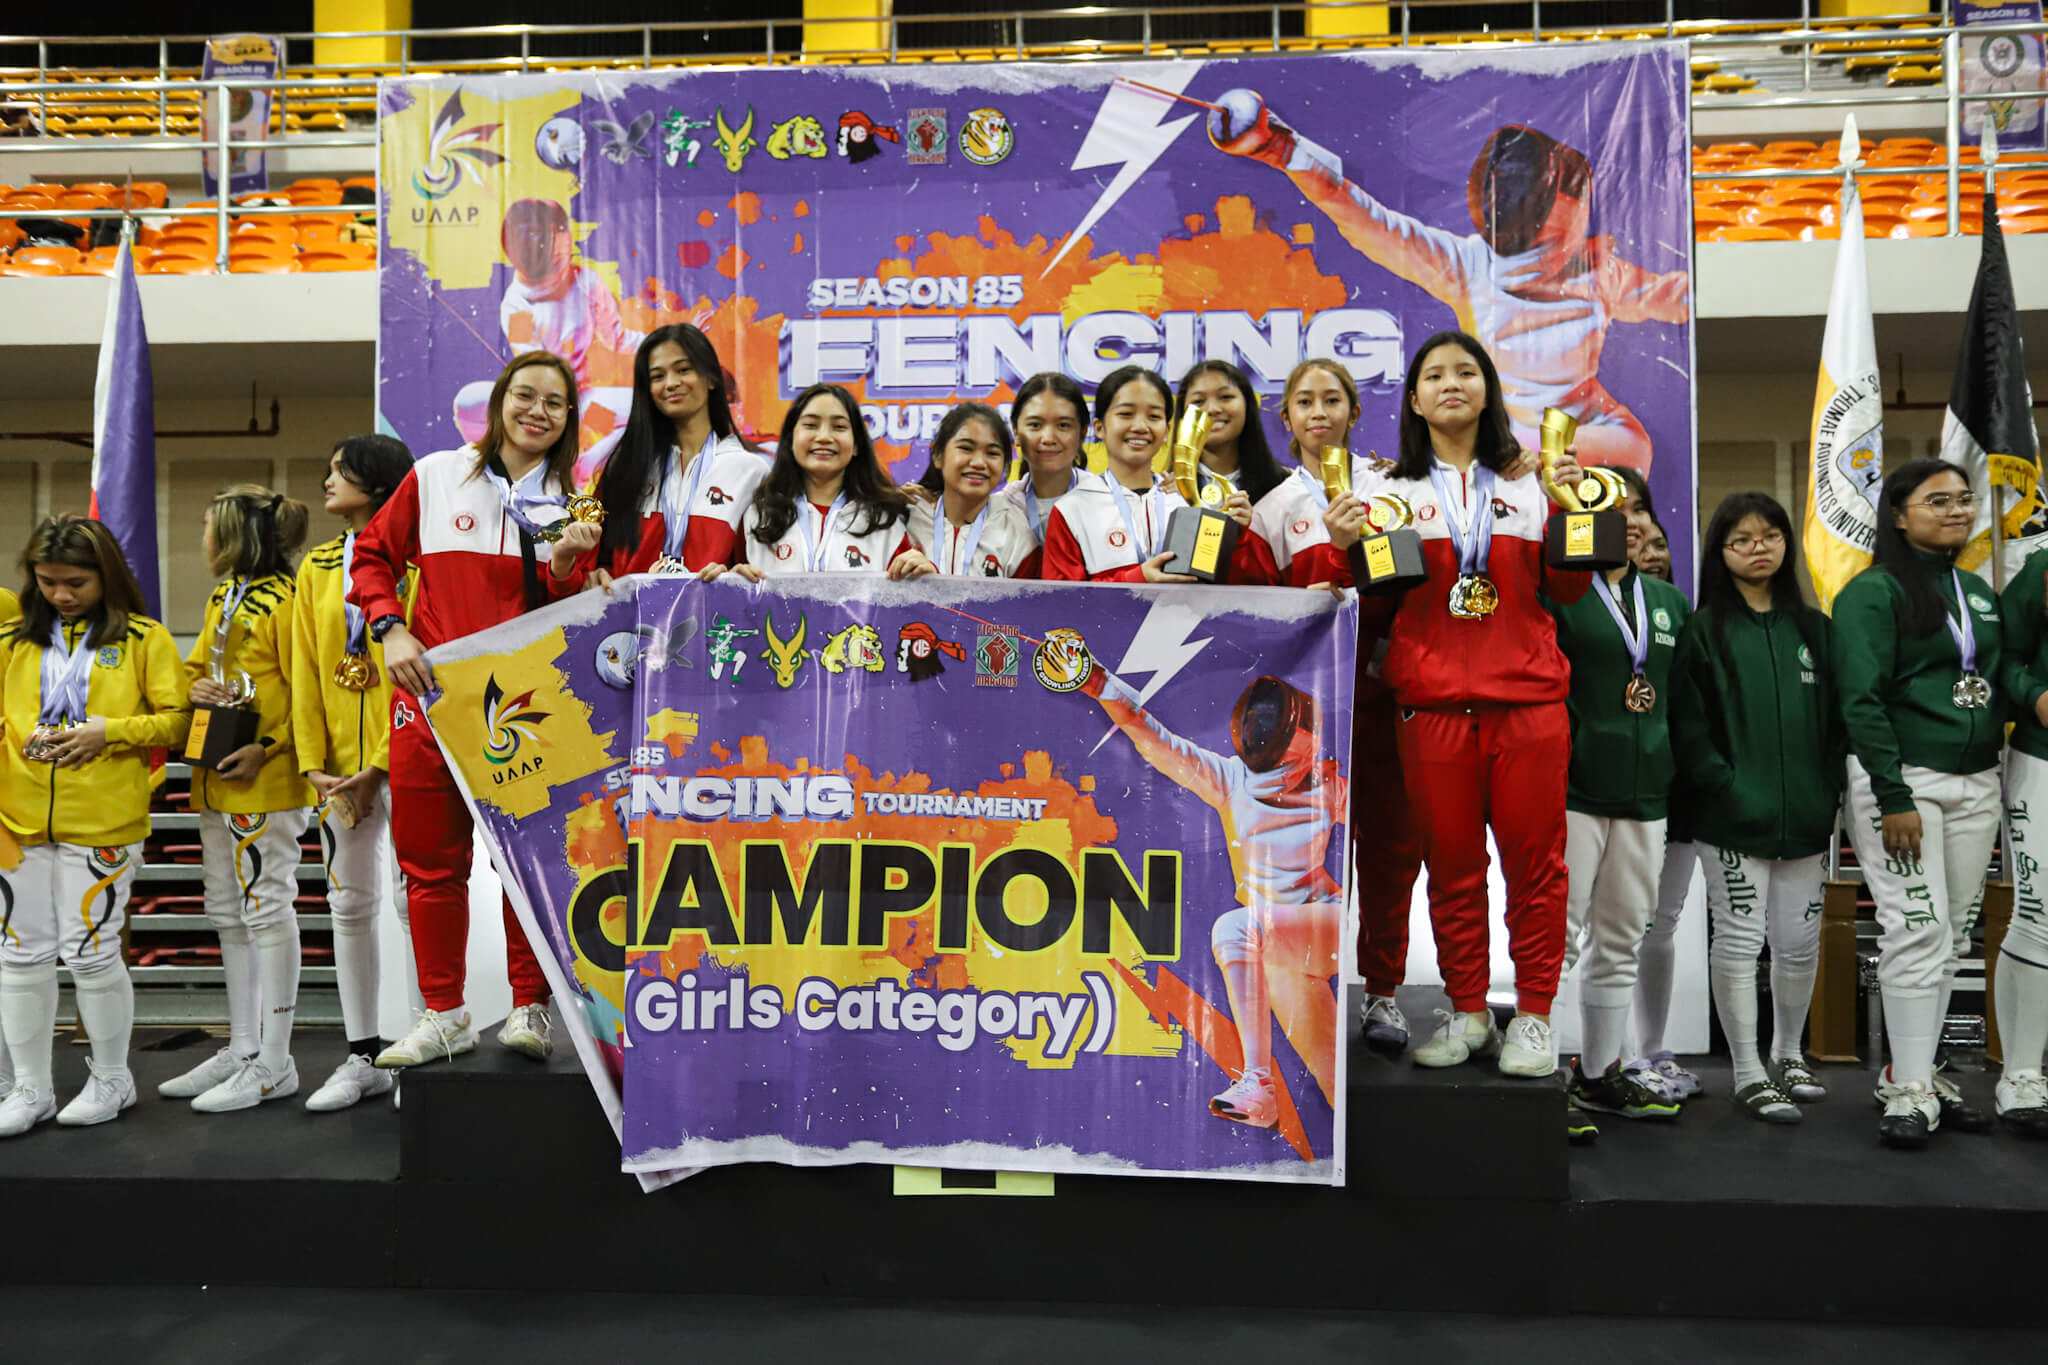 UAAP-85-FENCING-GIRLS-CHAMPIONUE UE completes sweep of all four UAAP fencing divisions Fencing News UAAP UE  - philippine sports news